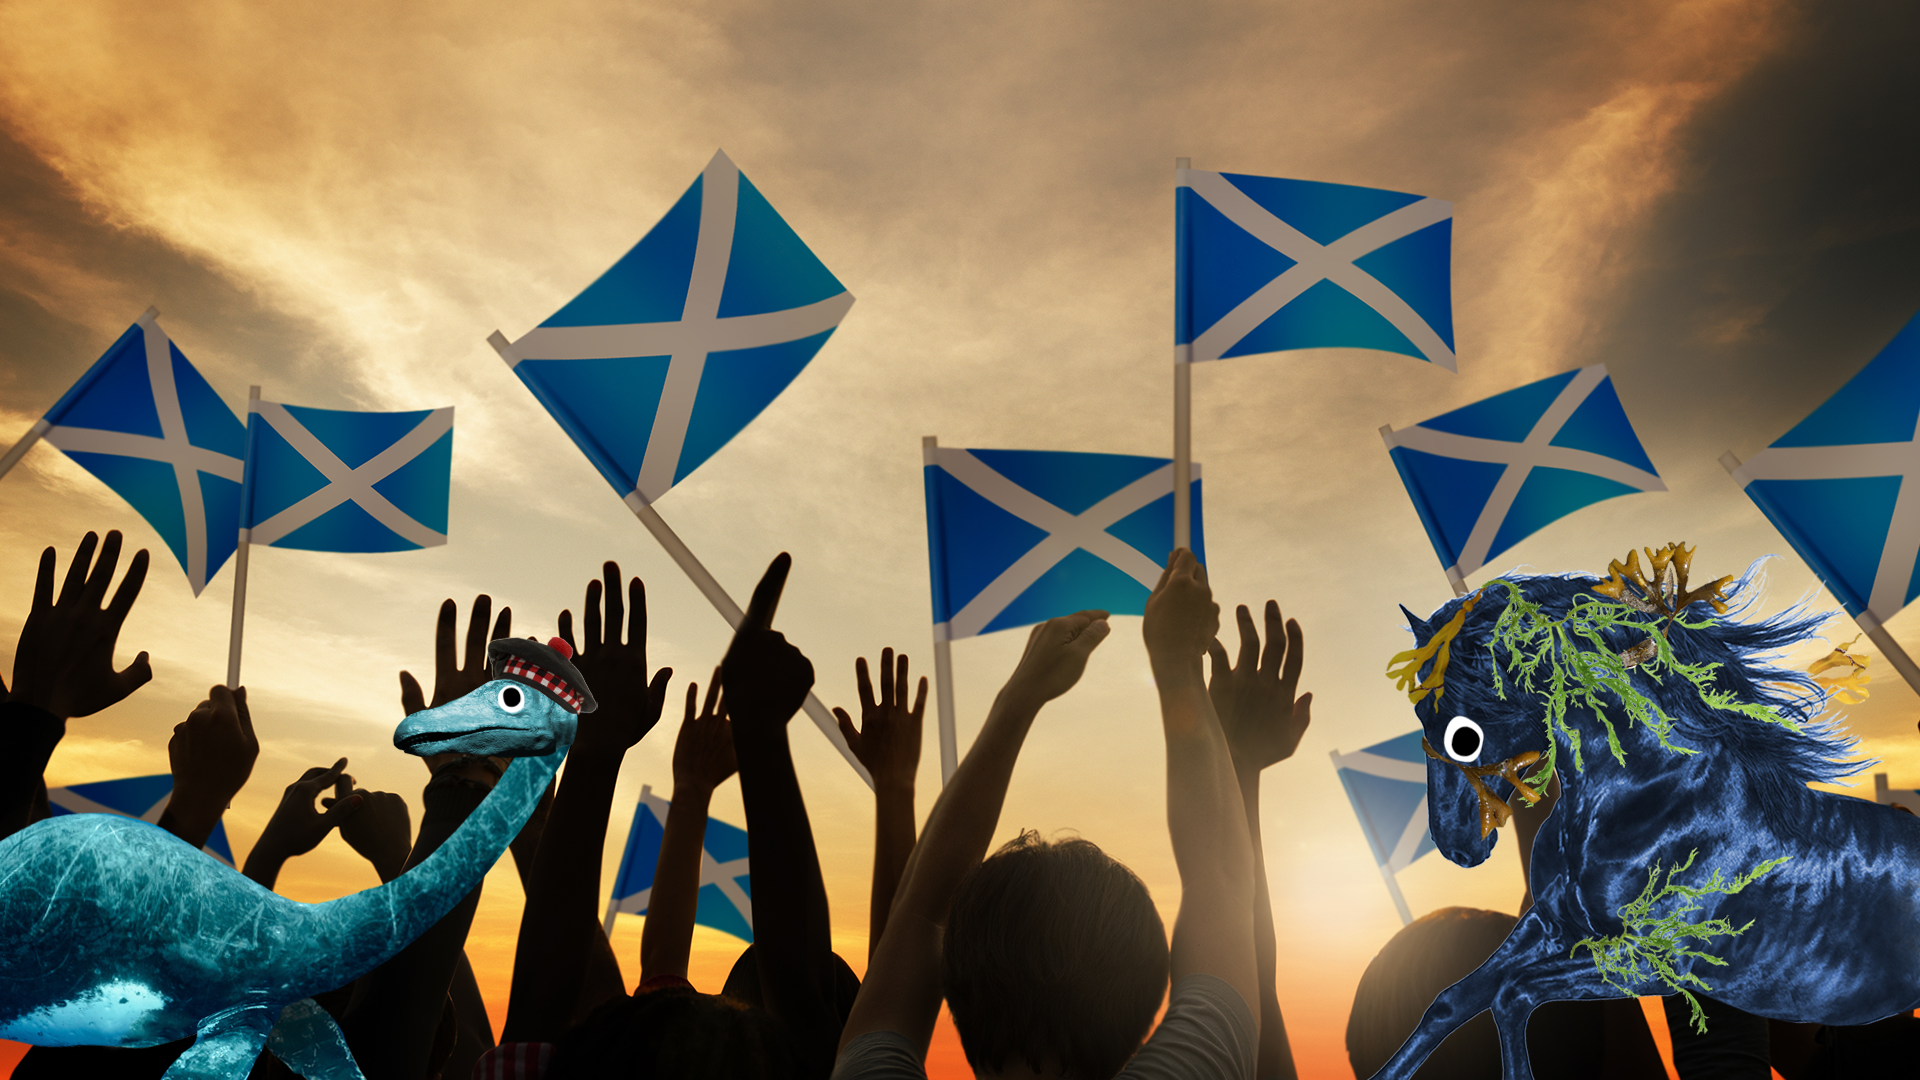 Scottish people waving flags in sunset with Beano monsters